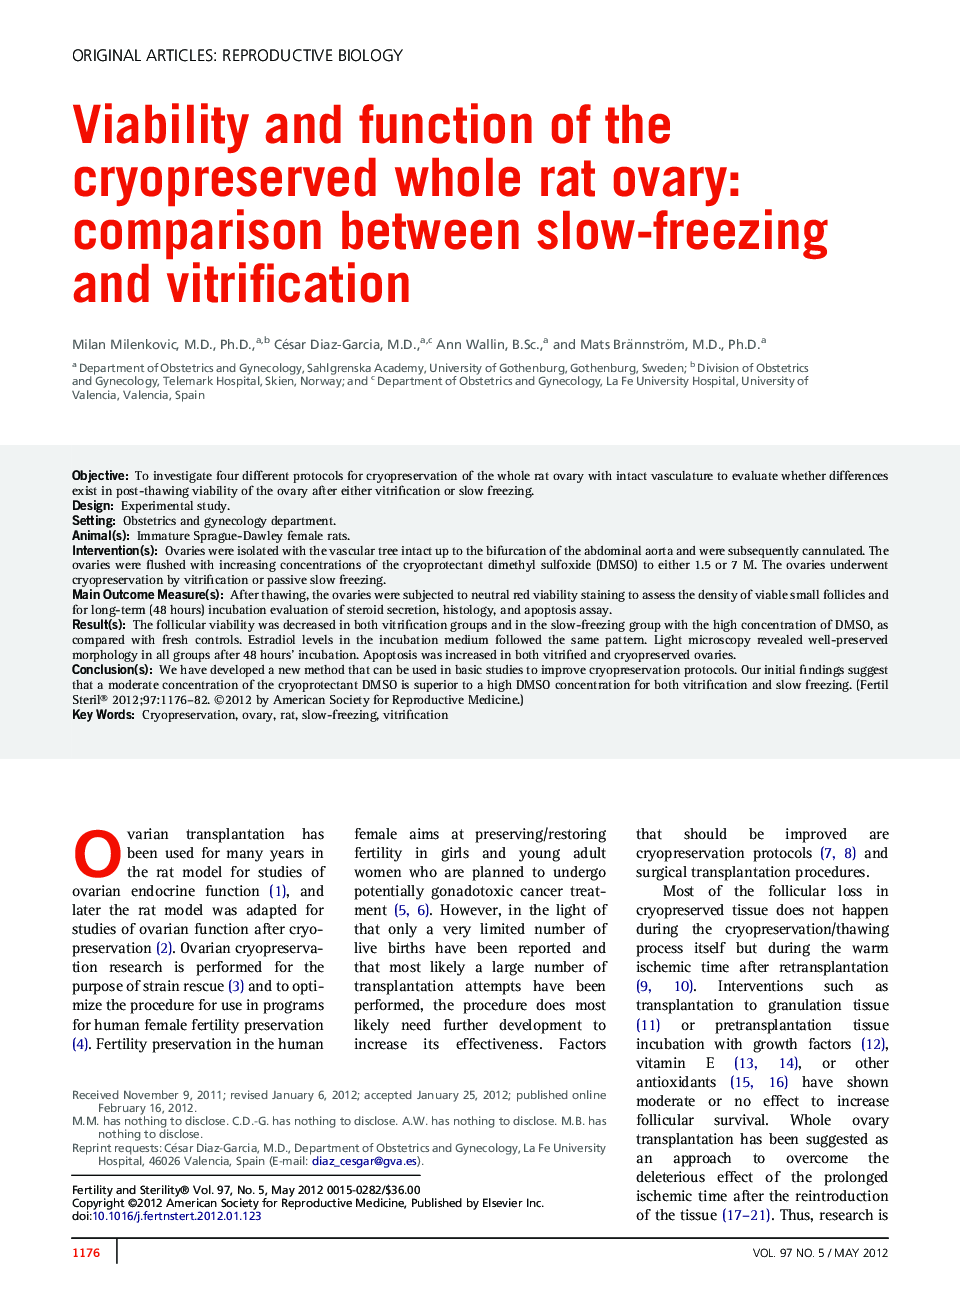 Viability and function of the cryopreserved whole rat ovary: comparison between slow-freezing and vitrification 